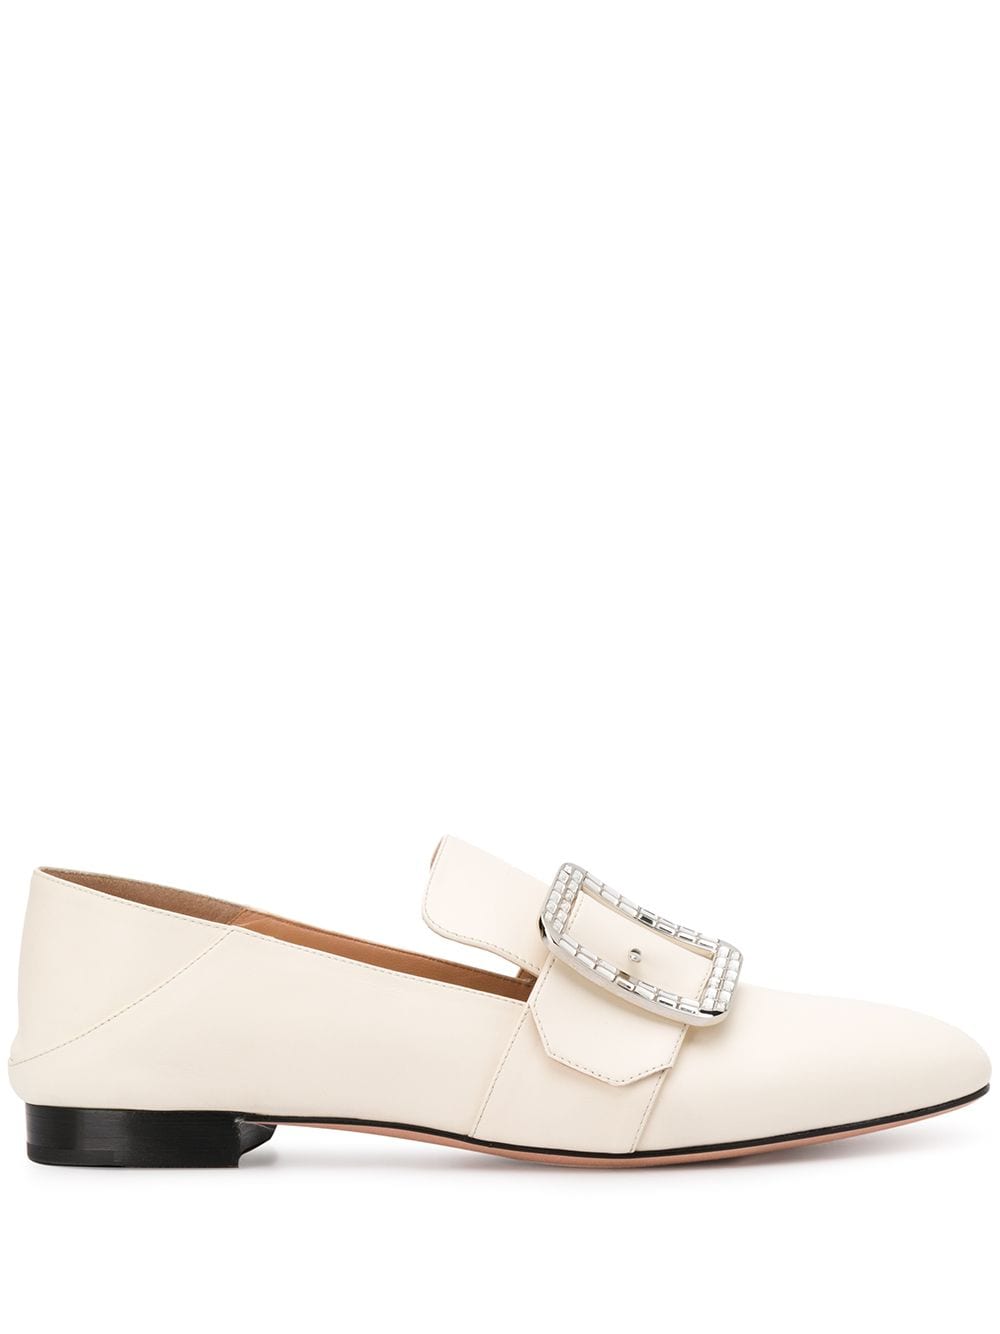 Image 1 of Bally Janelle rhinestone buckle loafers